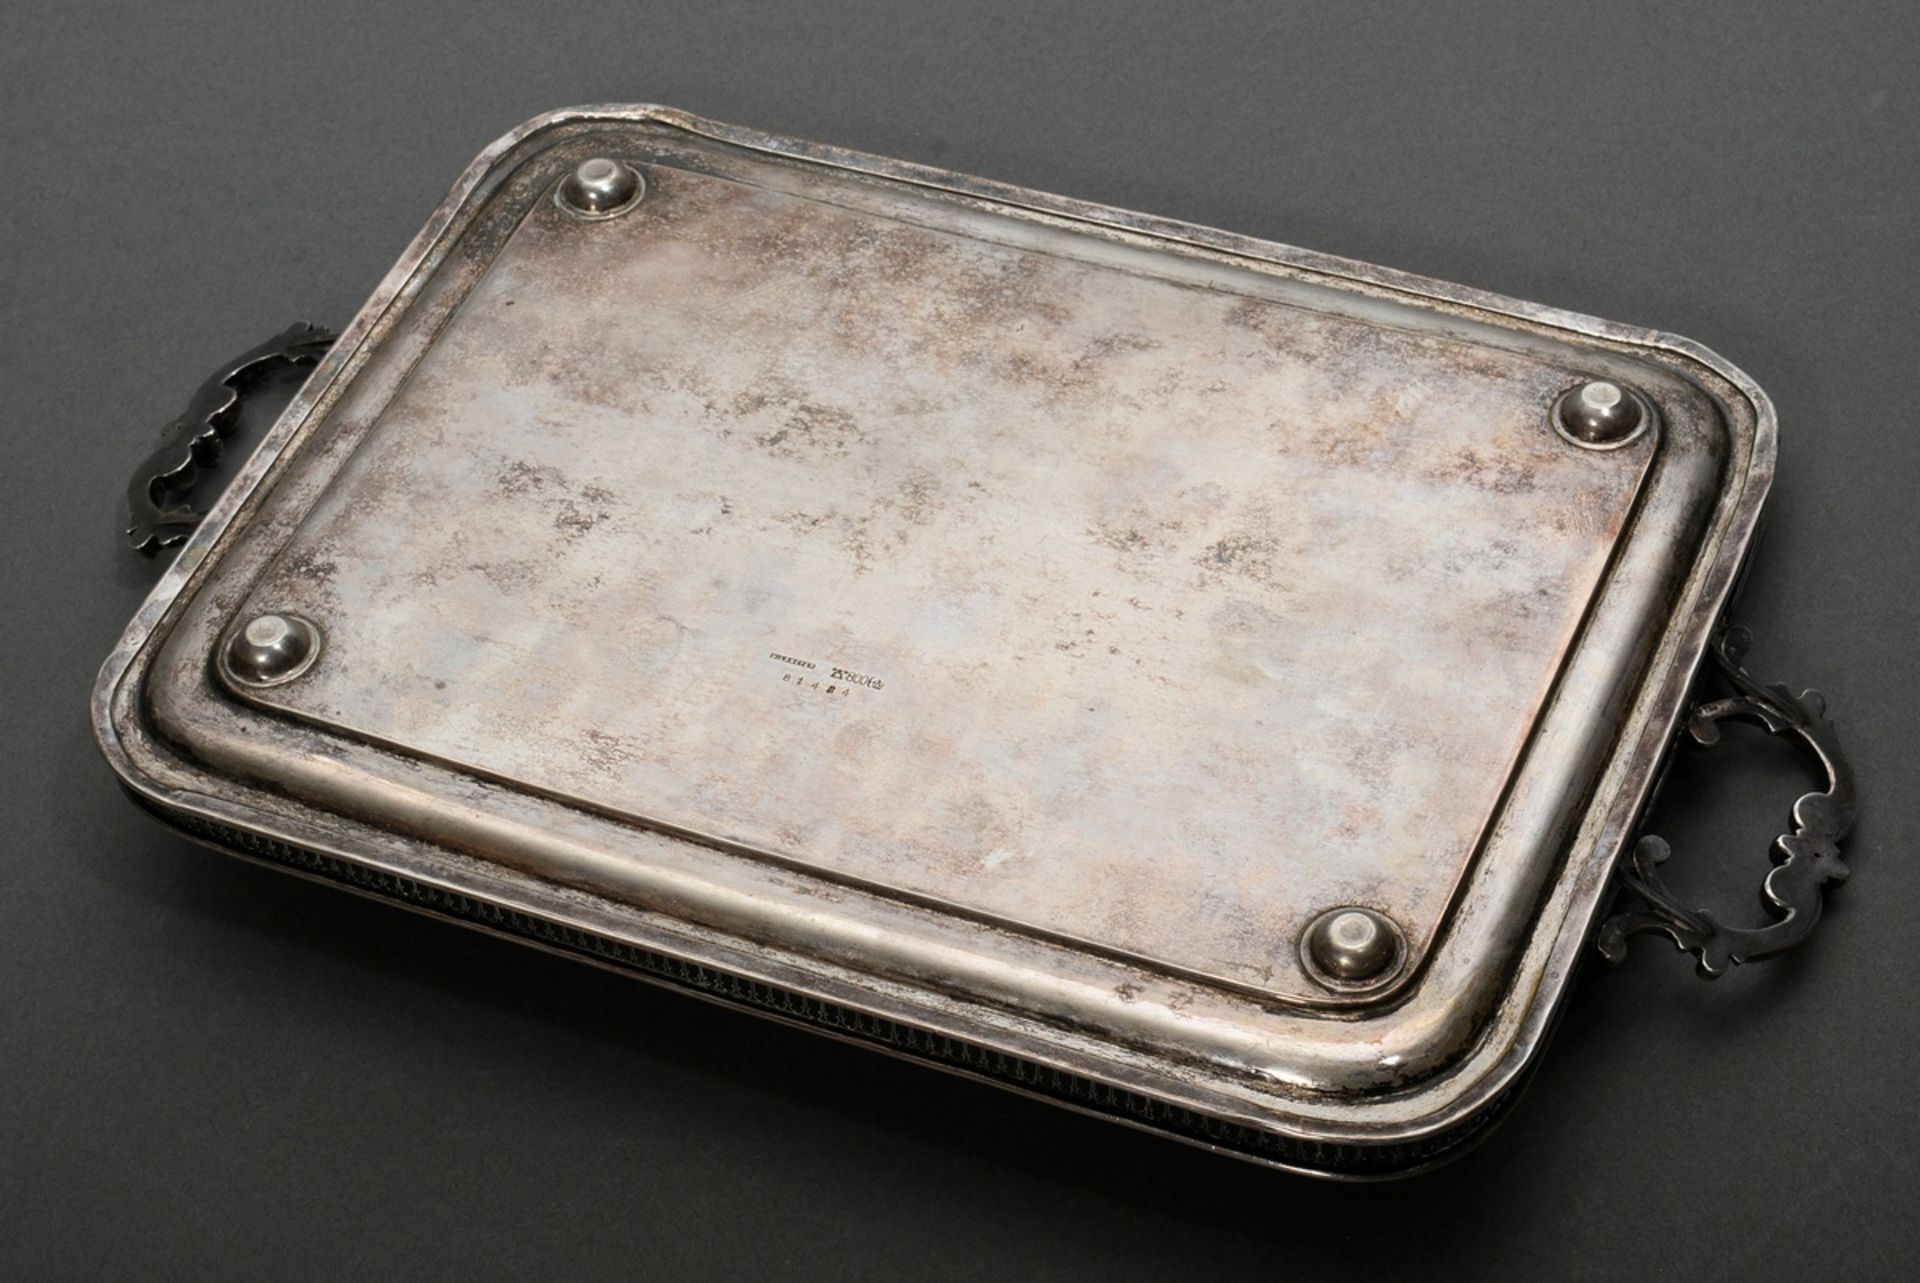 Rectangular historism tray with lattice rim and floral engraved plate, W. Lameyer, silver 800, 612g - Image 4 of 5